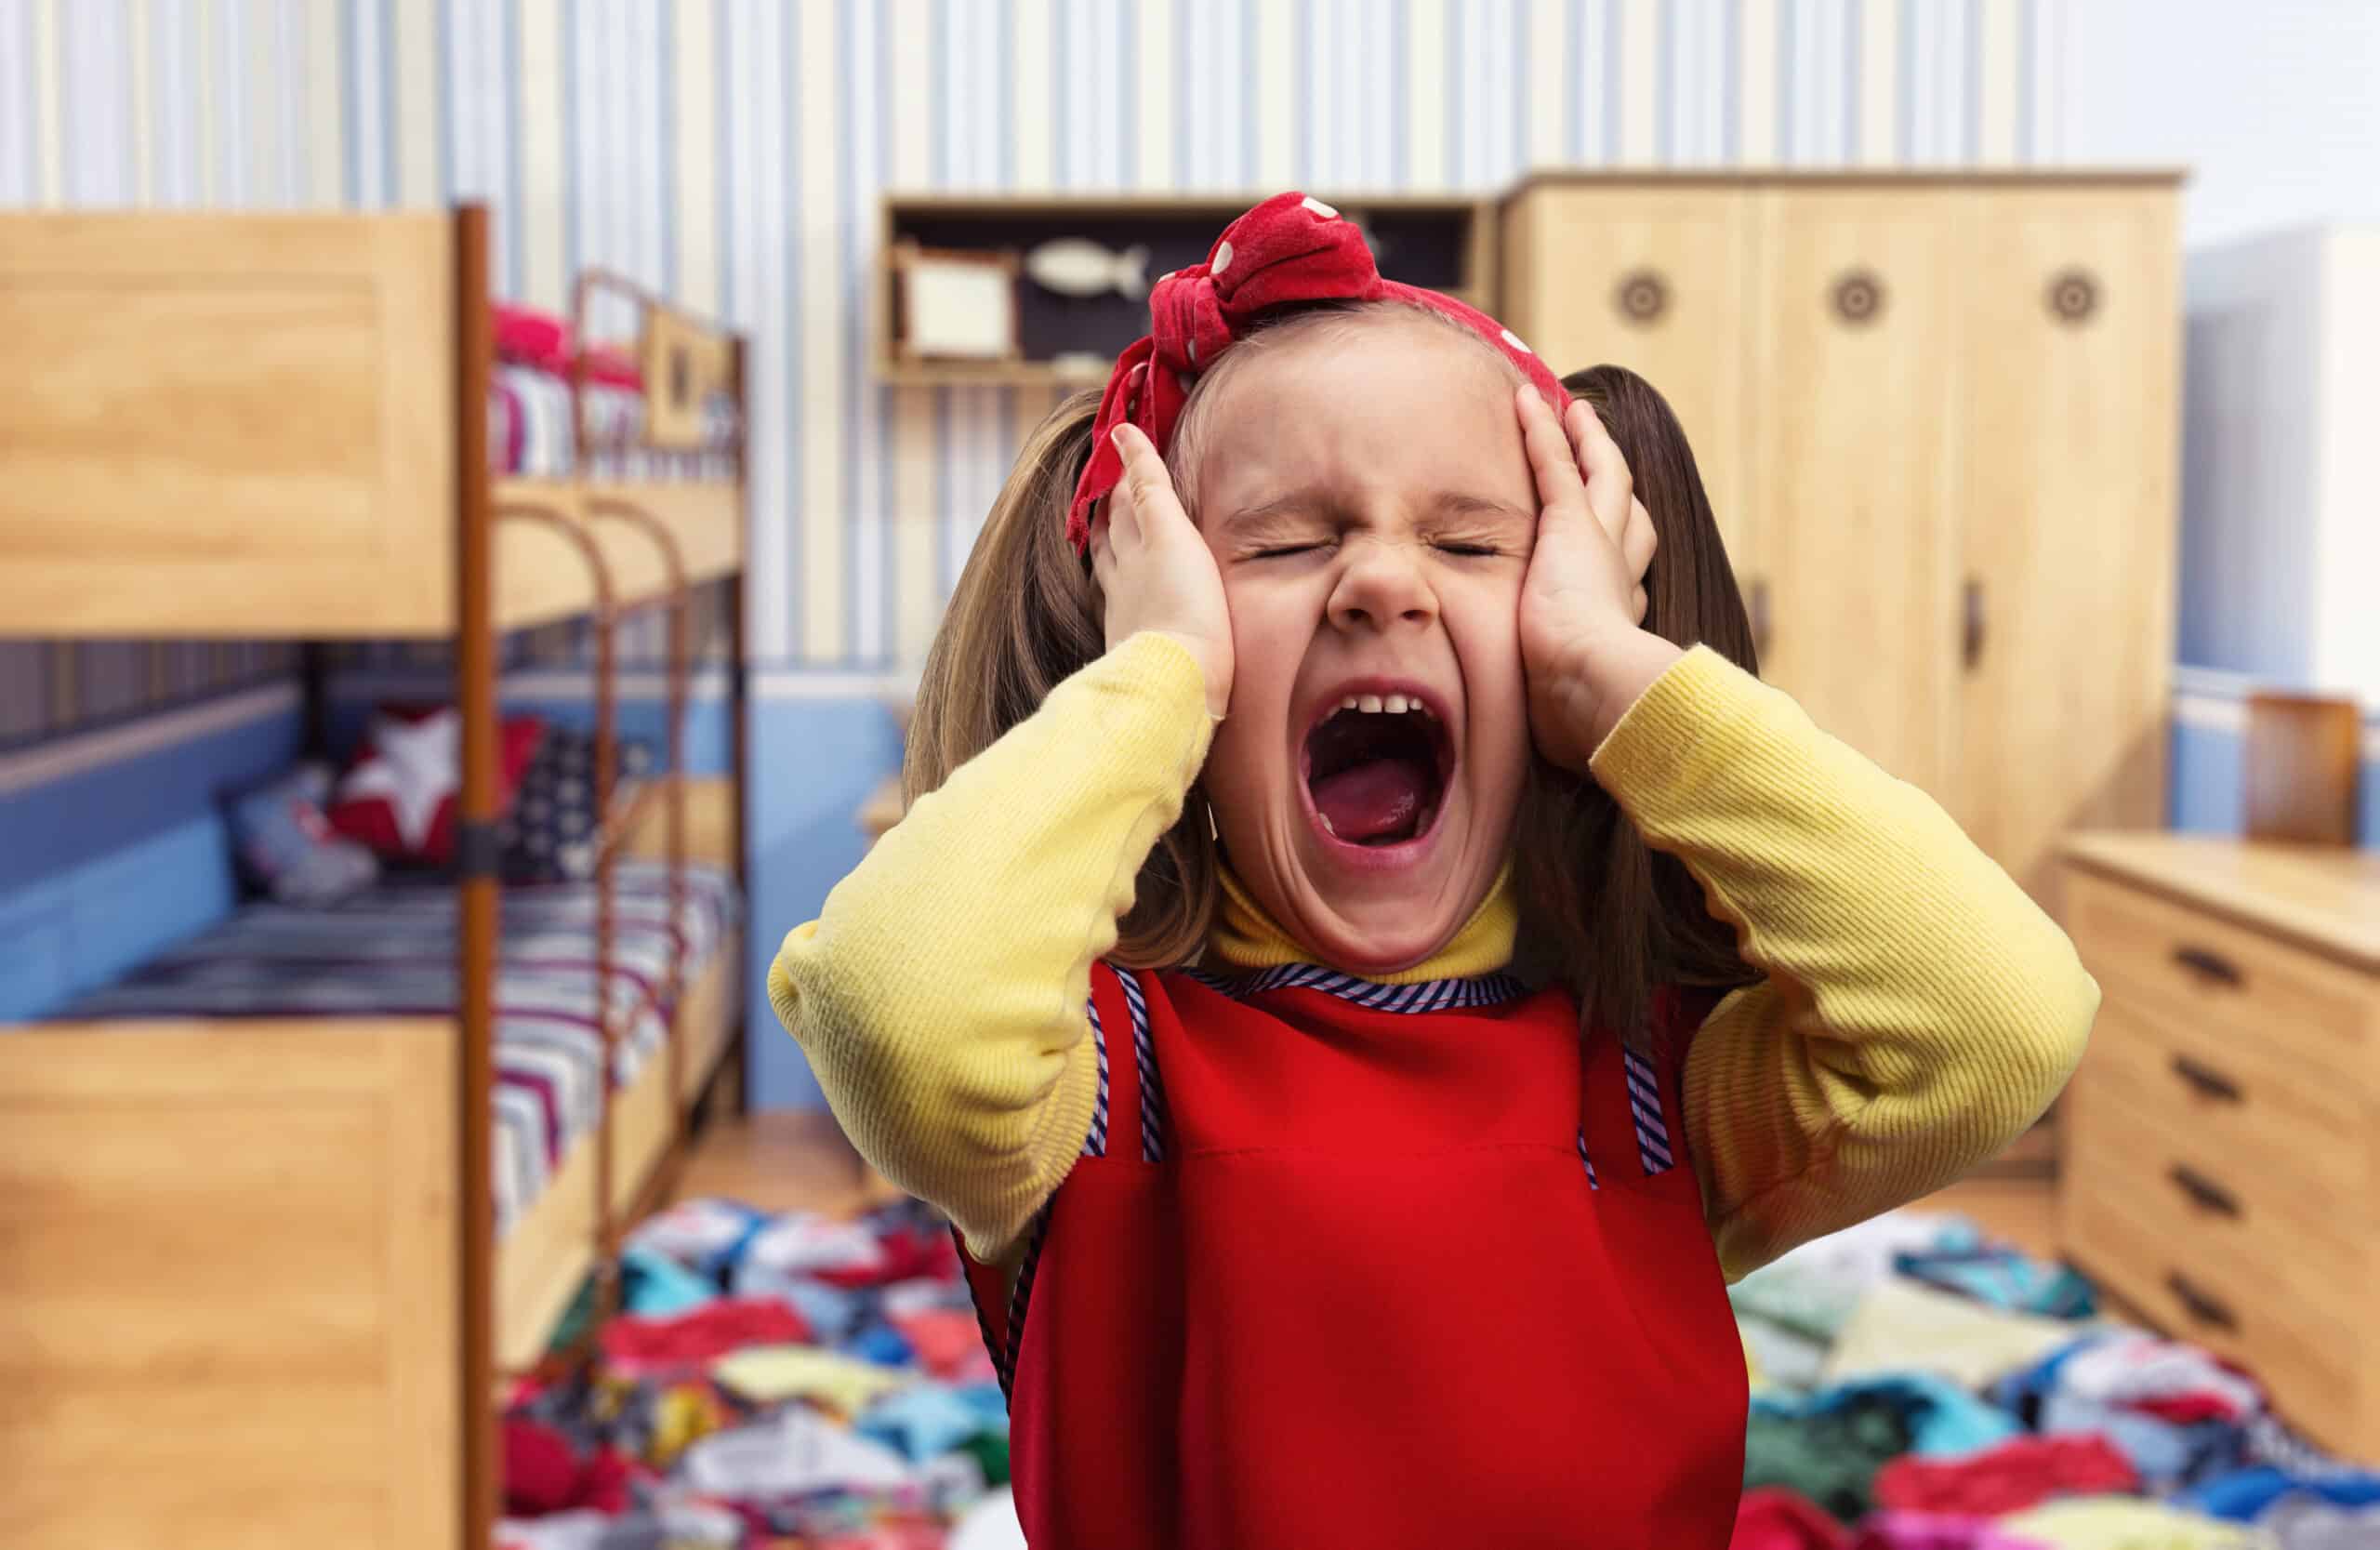 Calm Parent, Calm Child: 4 Steps to Manage Meltdowns and Yelling